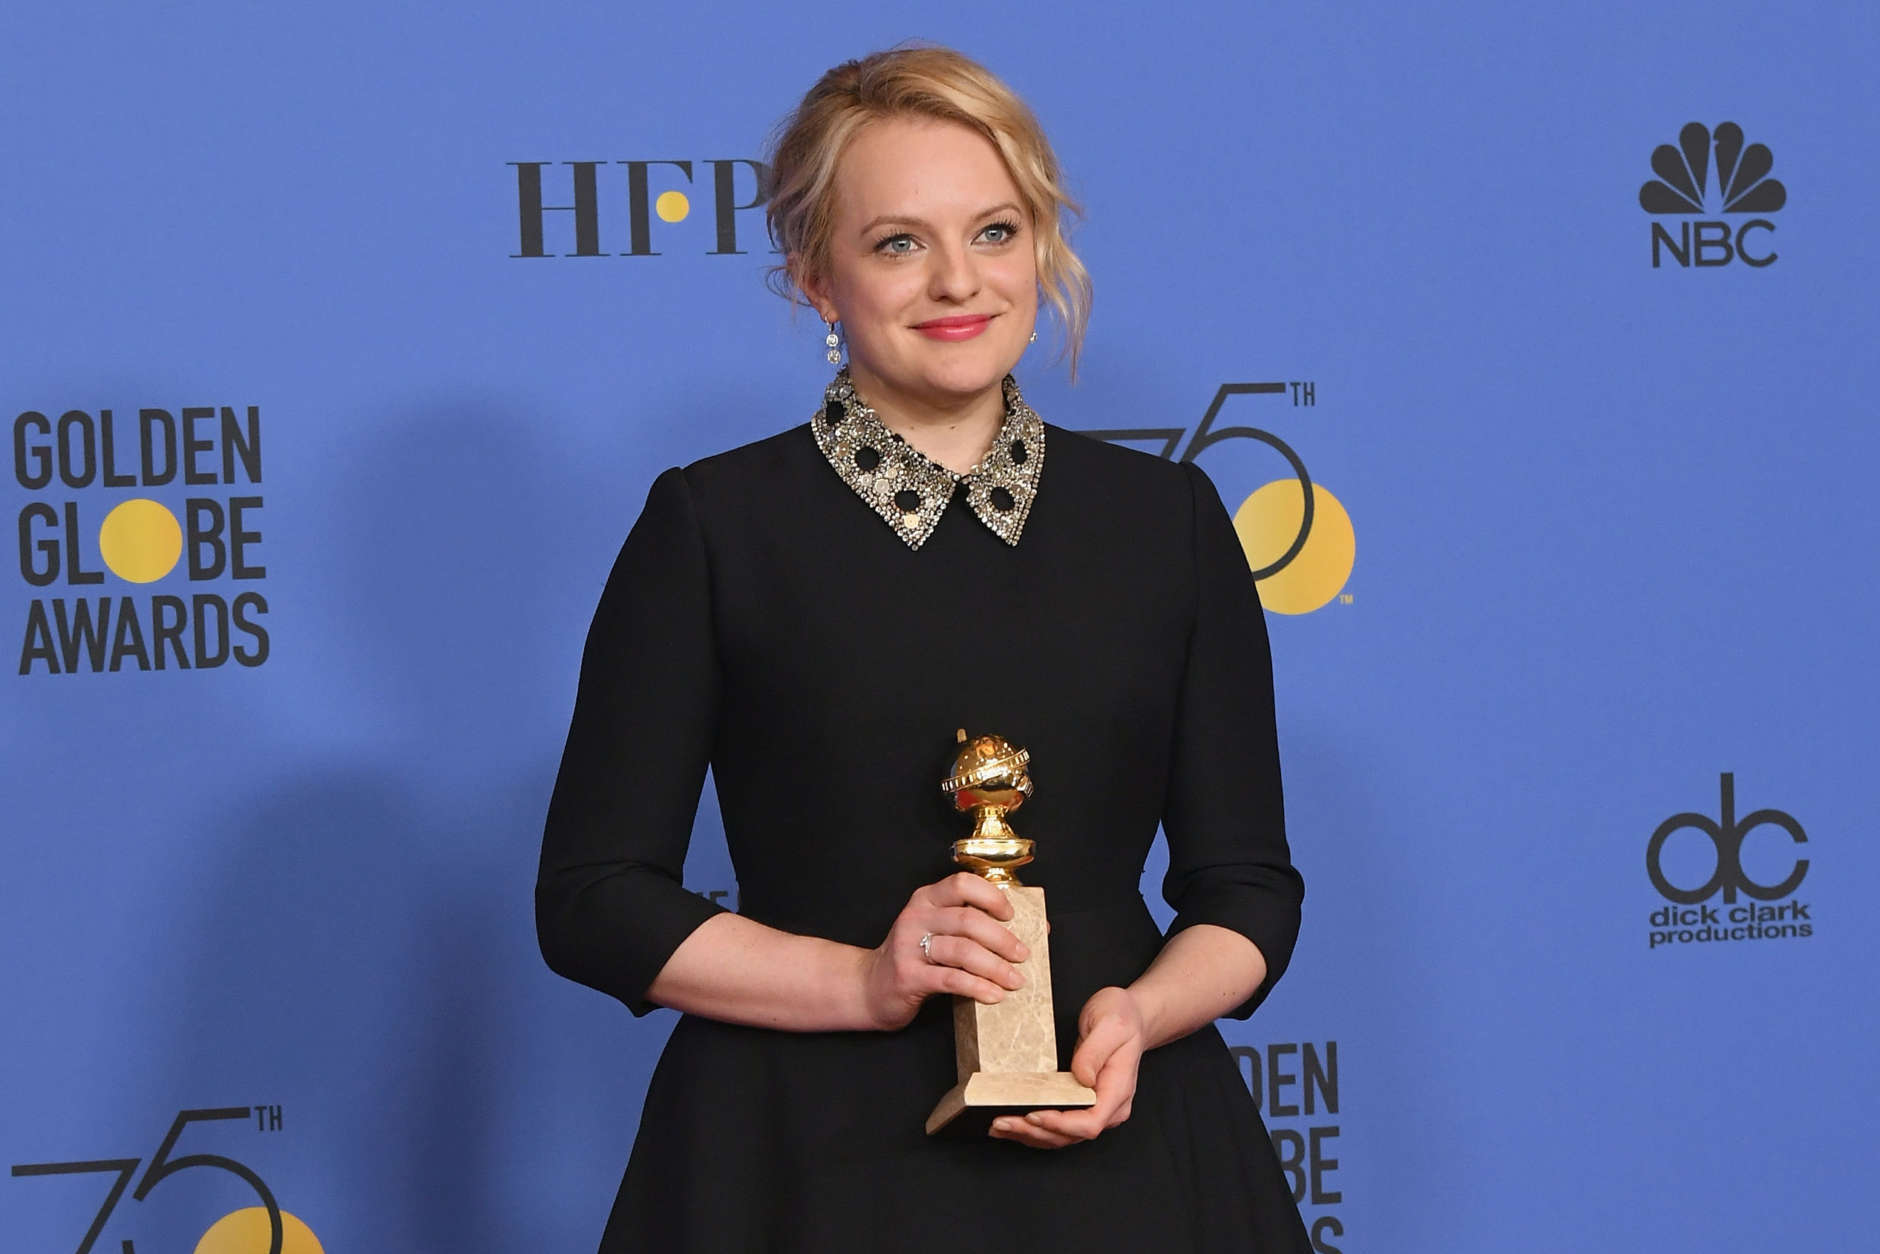 Producer Elisabeth Moss of 'The Handmaid's Tale' poses with the award for Best Television Series Drama in the press room during The 75th Annual Golden Globe Awards at The Beverly Hilton Hotel on January 7, 2018 in Beverly Hills, California.  (Photo by Kevin Winter/Getty Images)